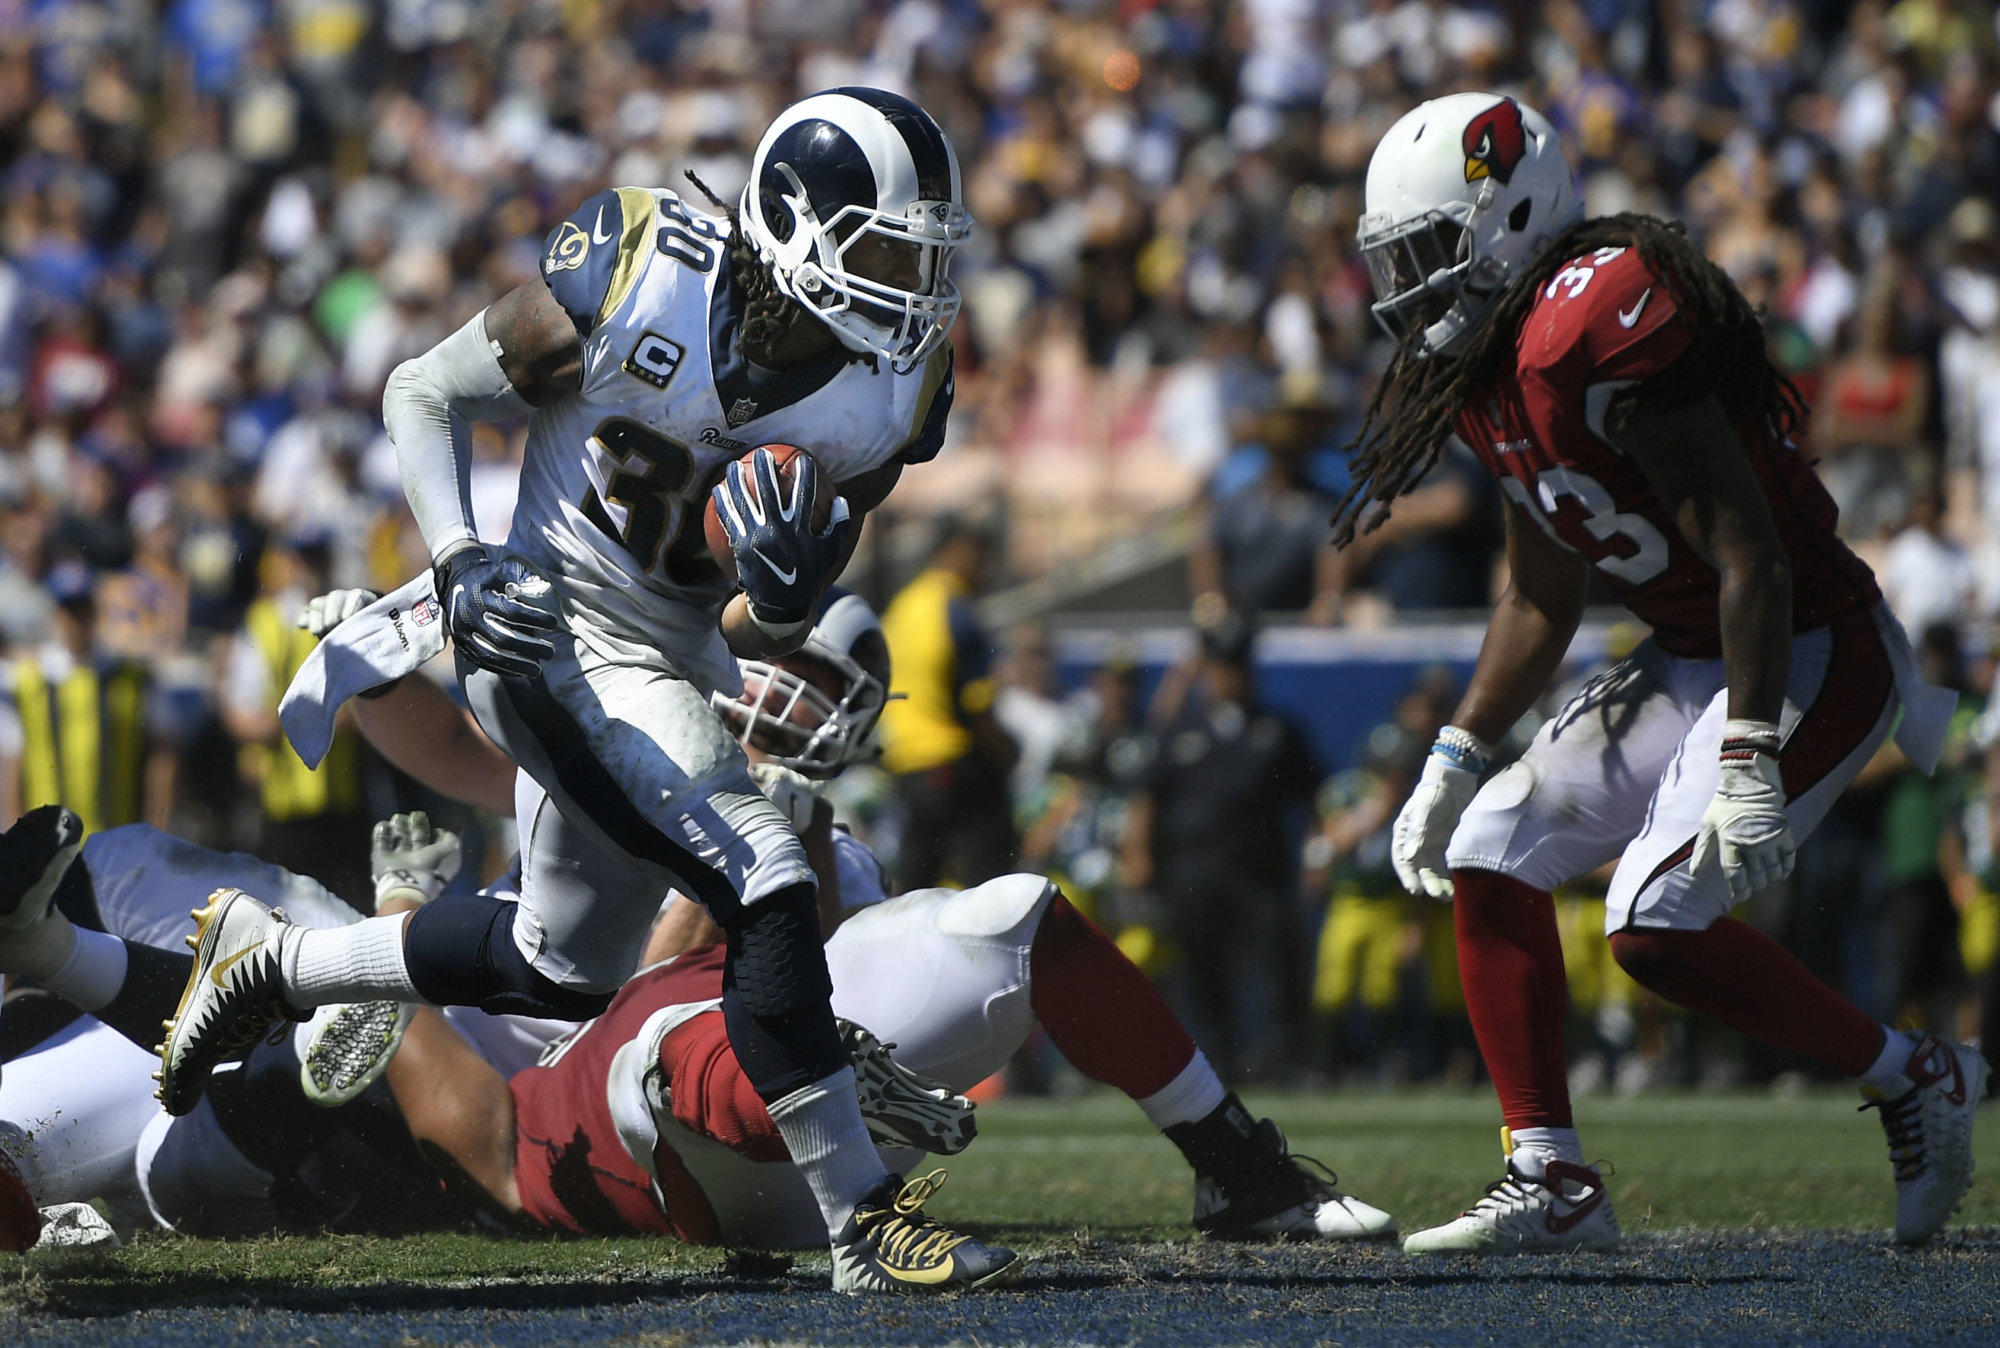 LOS ANGELES, CA - SEPTEMBER 16: Todd Gurley #30 of the Los Angeles Rams scores a touchdown in the second quarter against the Arizona Cardinals at Los Angeles Memorial Coliseum on September 16, 2018 in Los Angeles, California. (Photo by John McCoy/Getty Images)